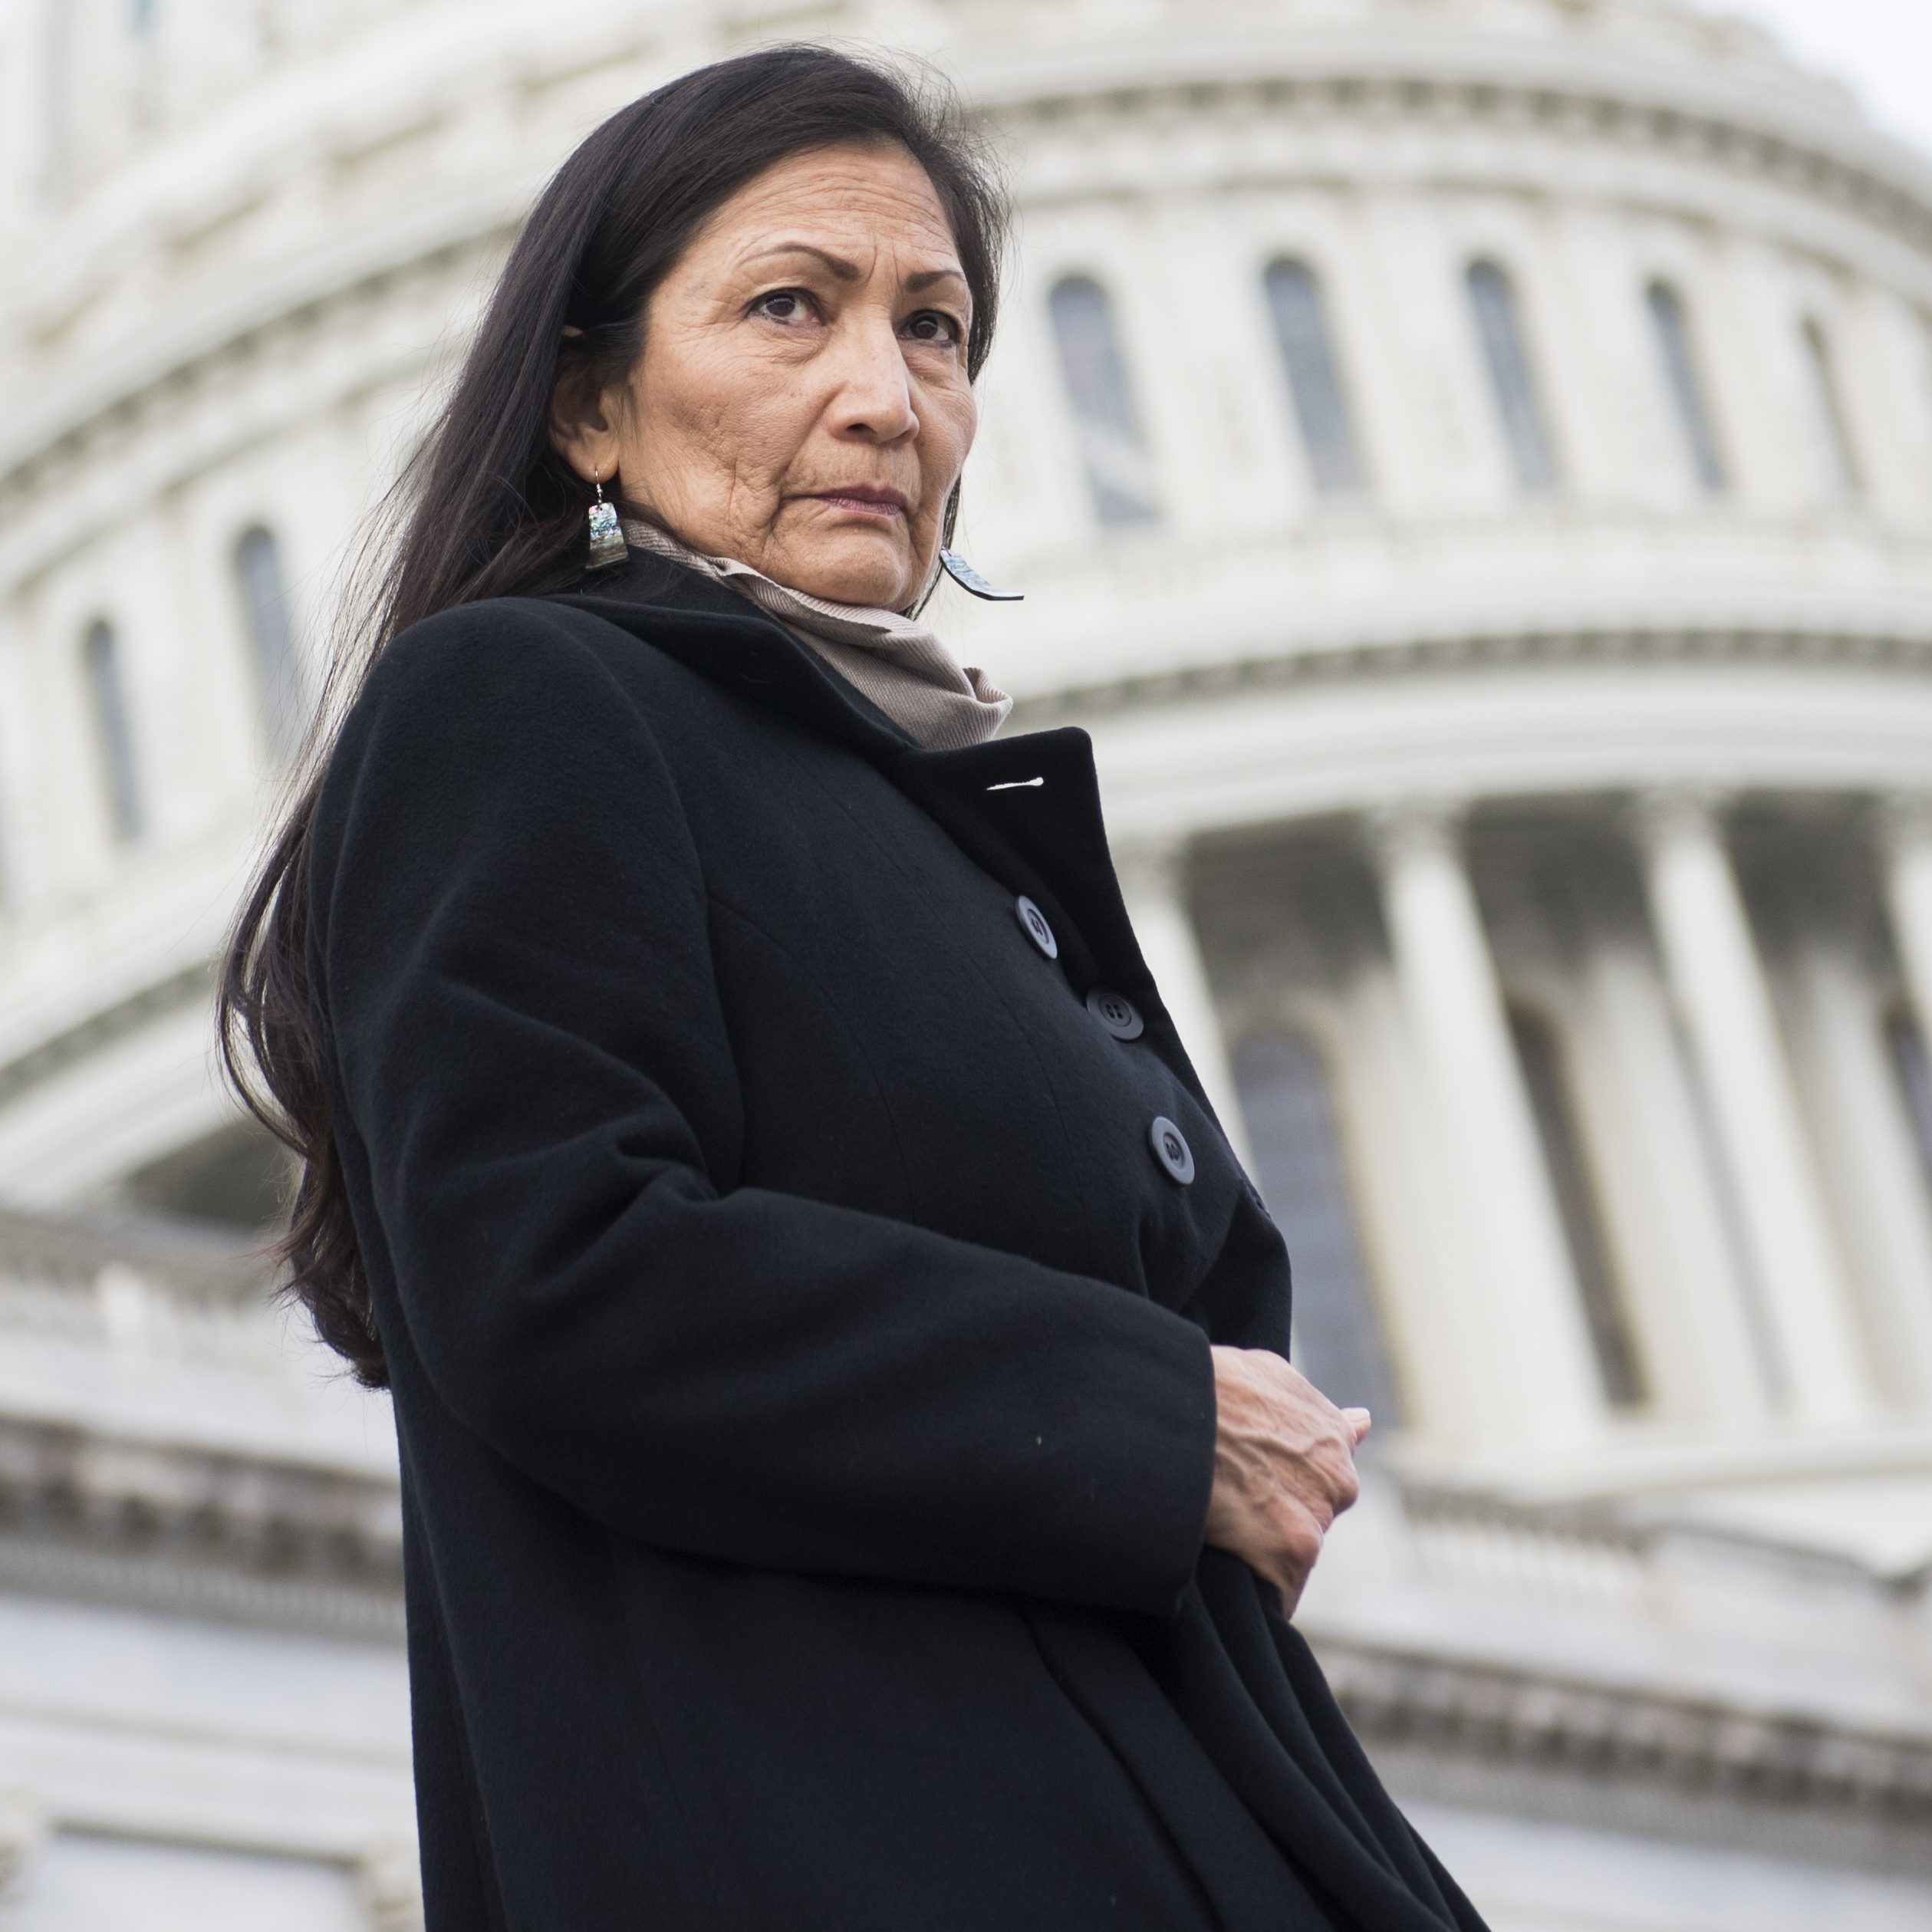 Rep. Deb Haaland, D-N.M., on the Capitol steps in Washington, D.C. on Jan. 4, 2019. (Tom Williams—CQ Roll Call/Getty Images)